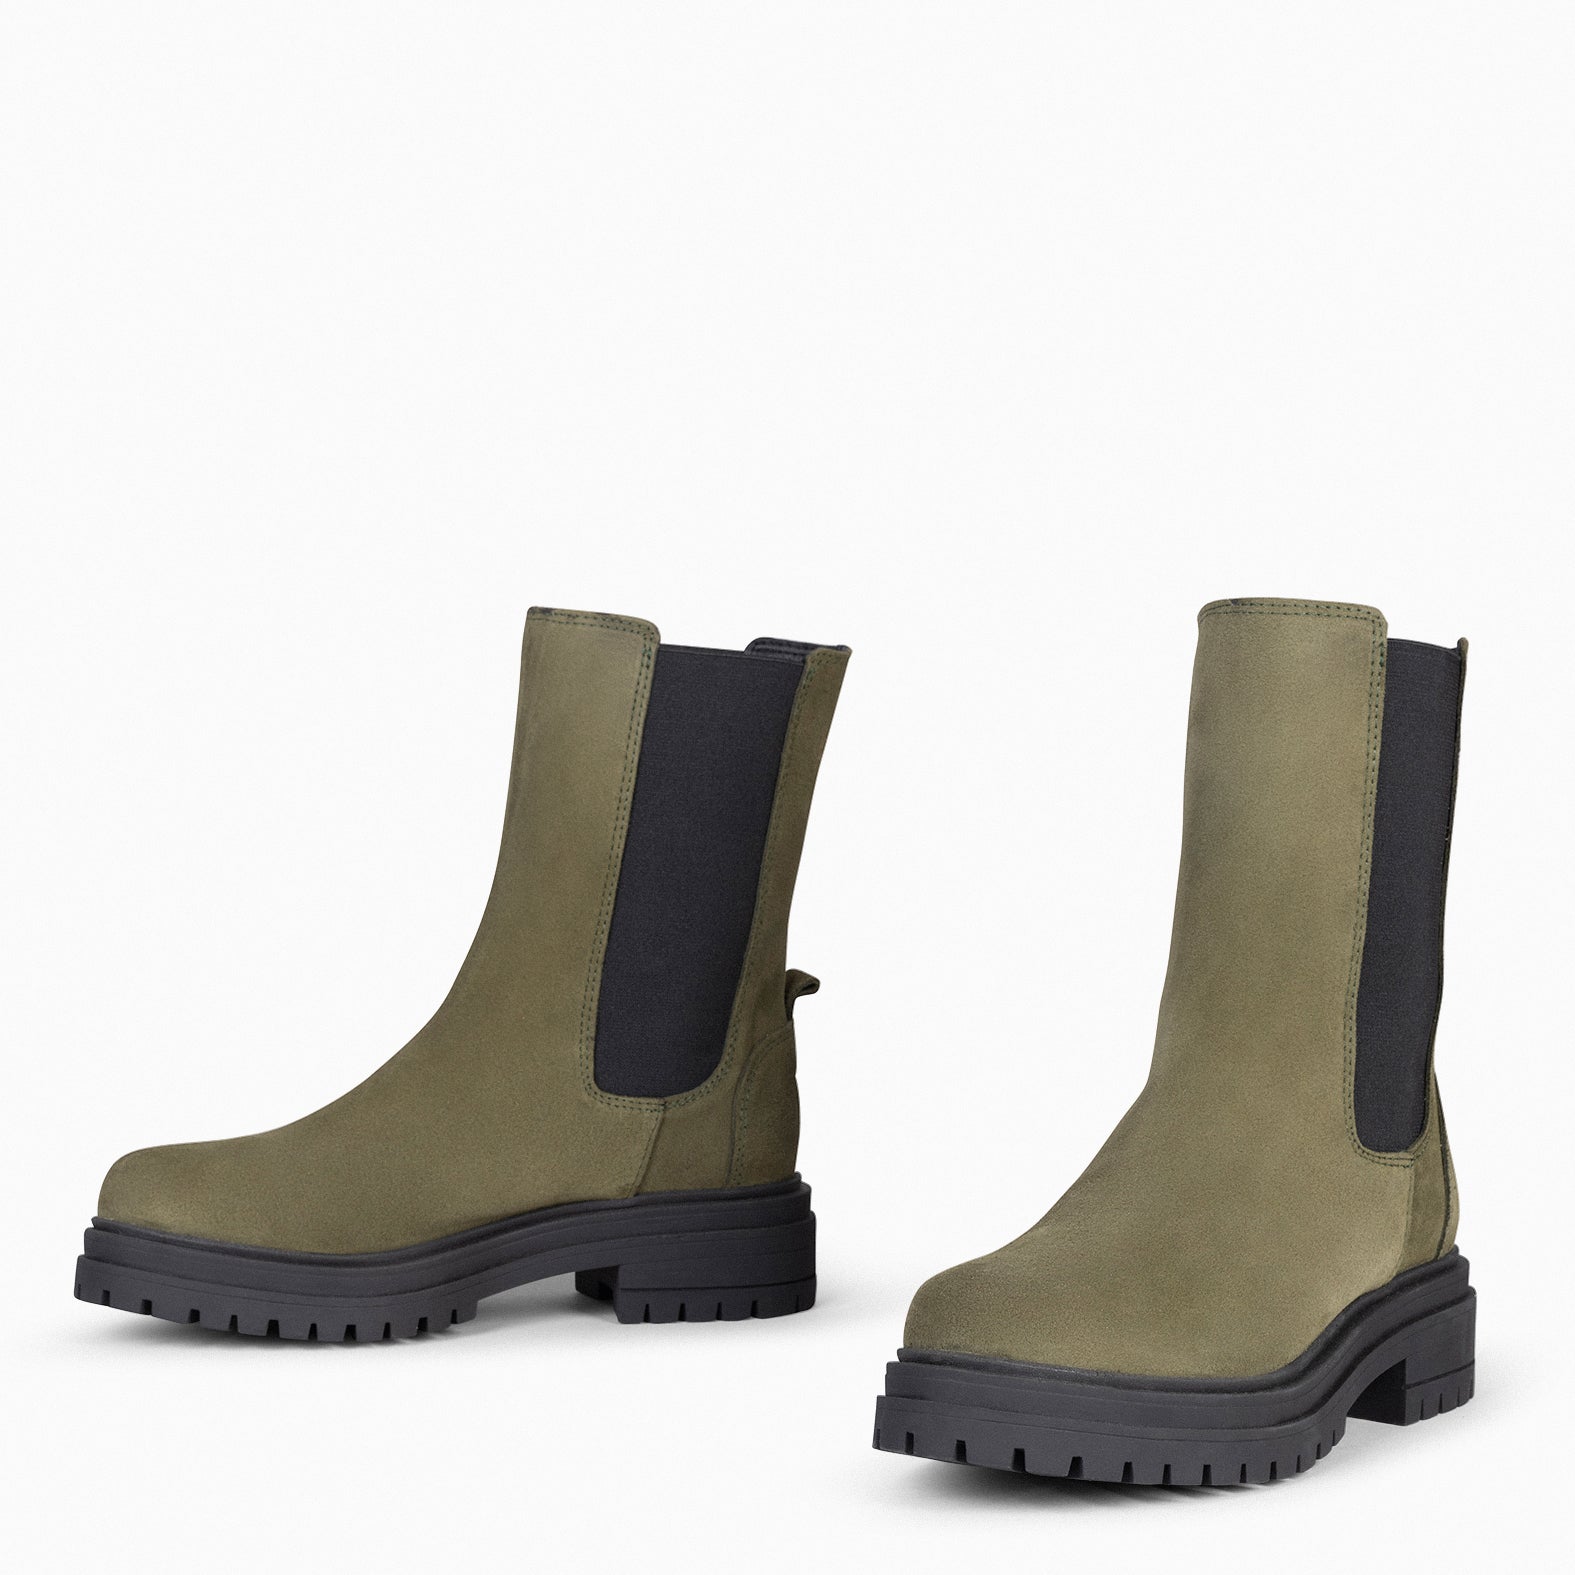 STANFORD – KHAKI Chelsea Boots with Track Platform